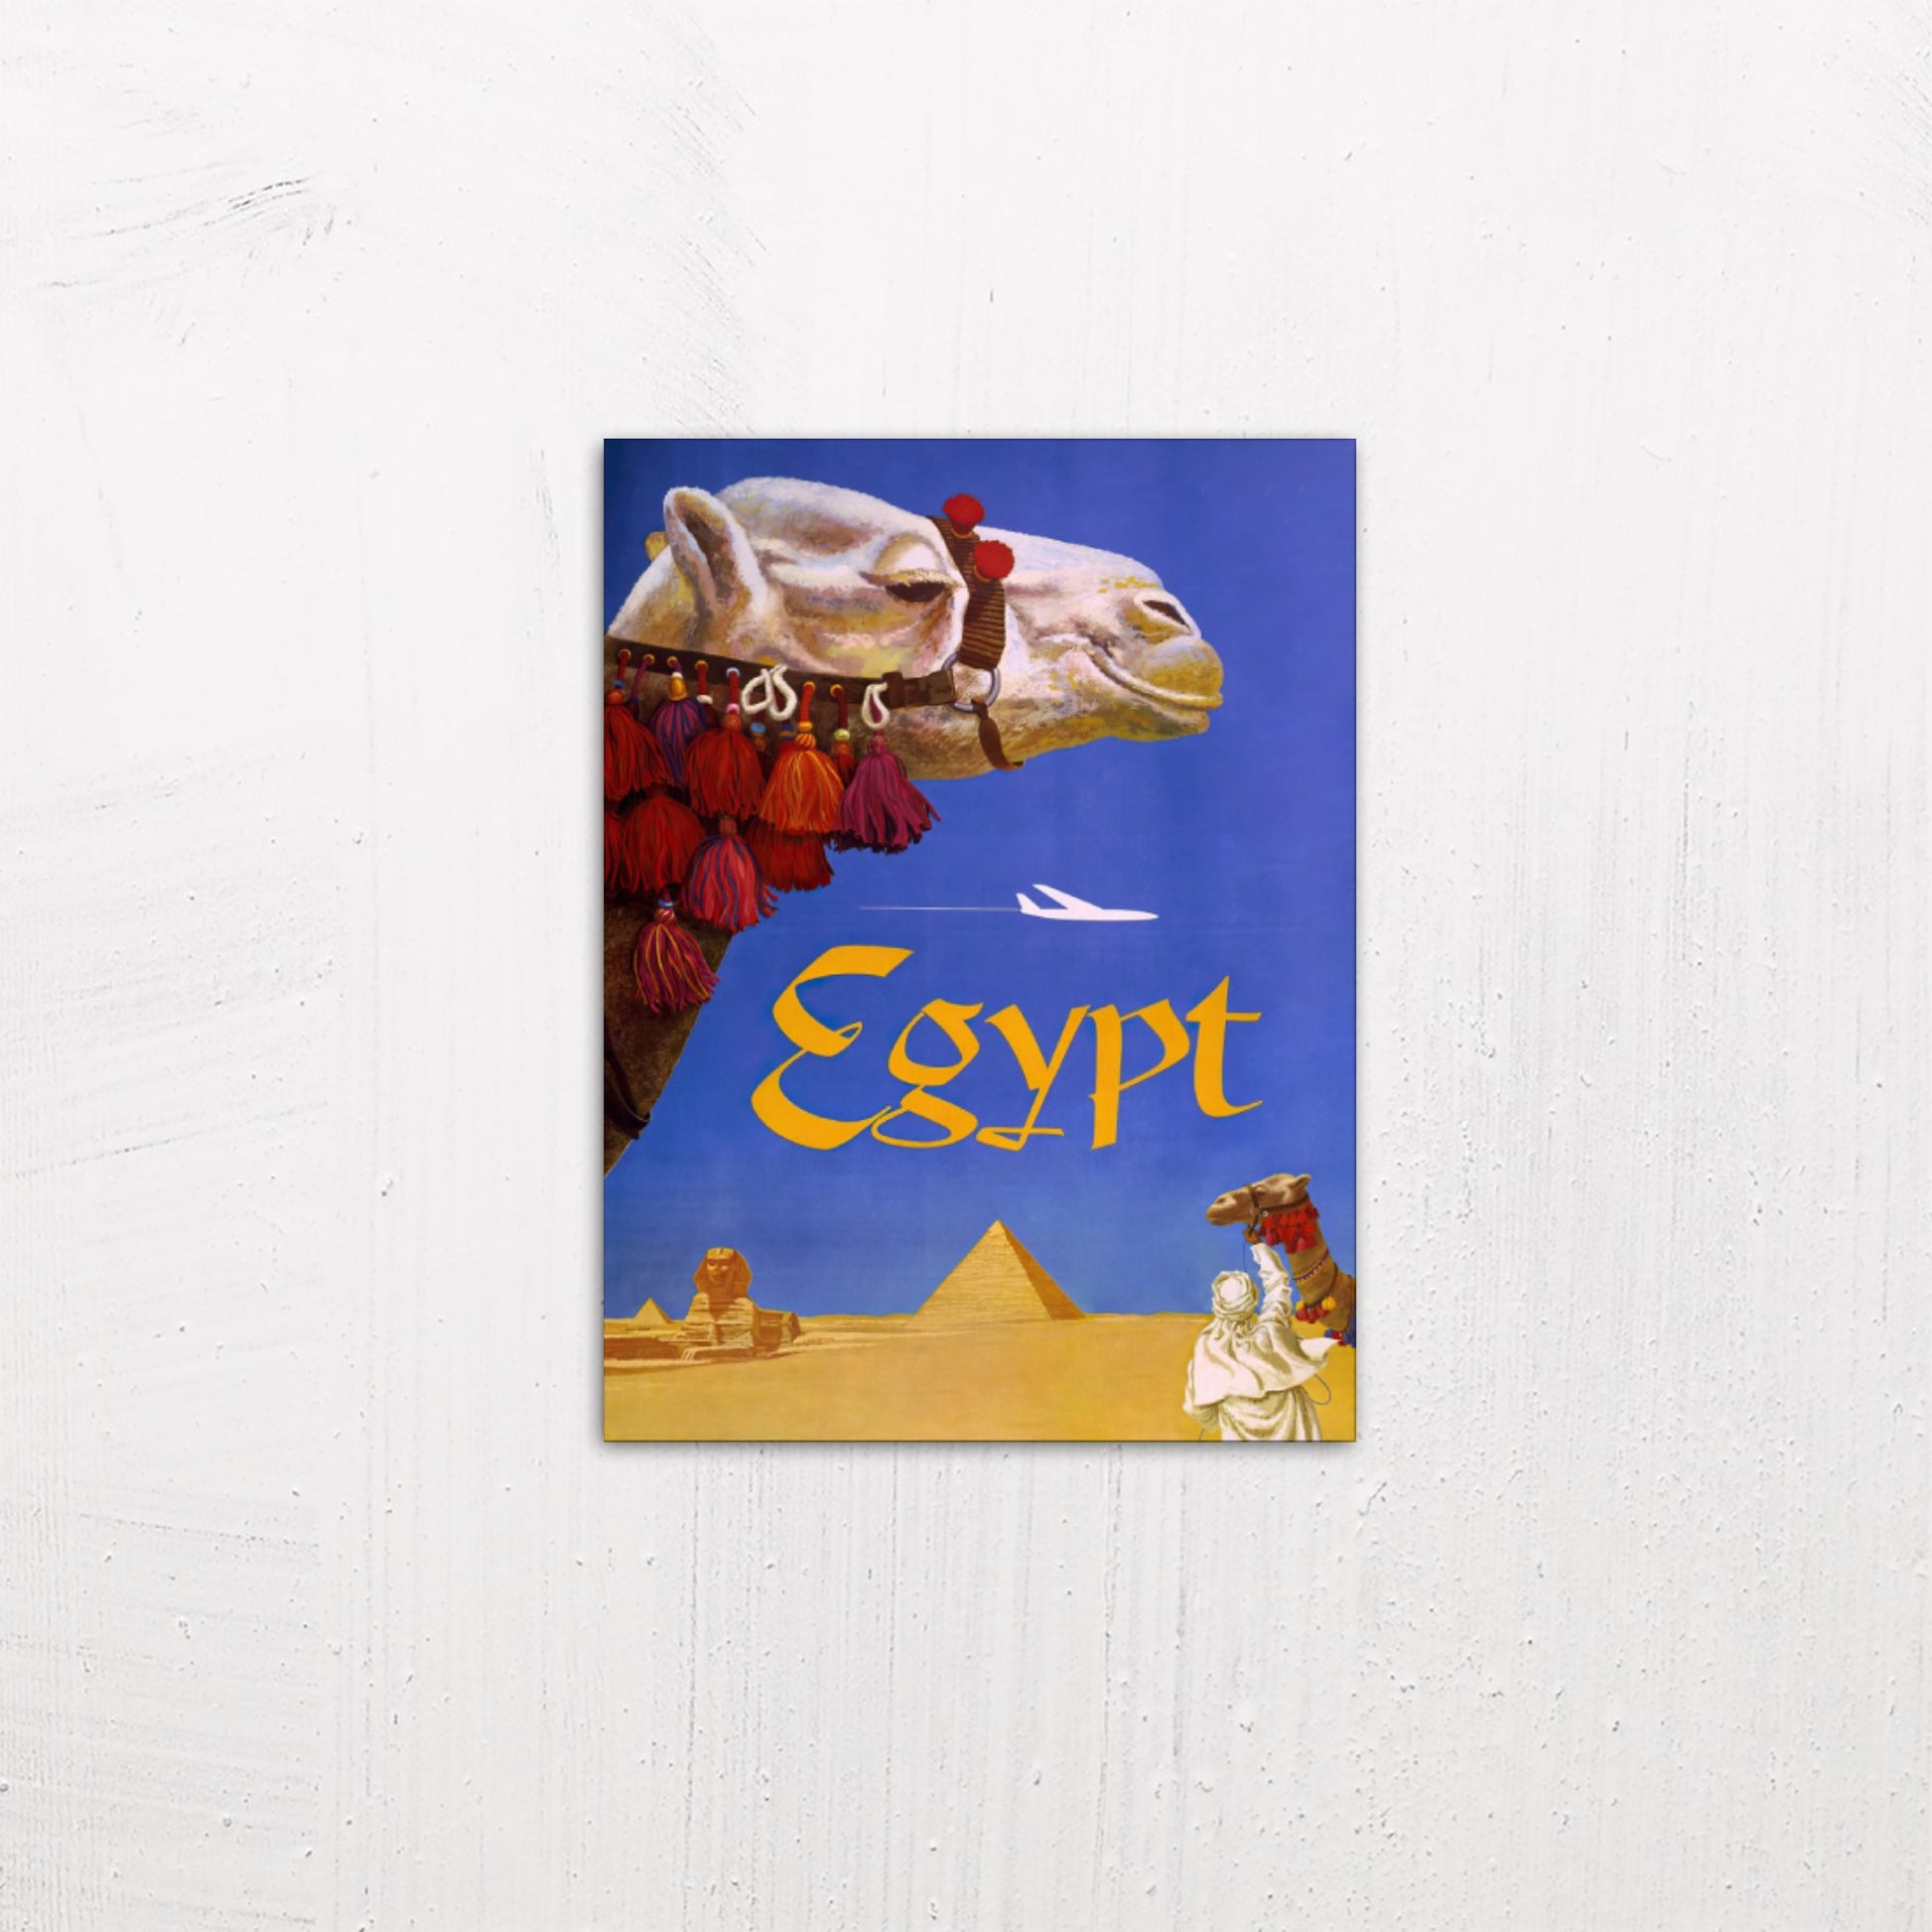 A small size metal art poster display plate with printed design of a Egypt Fly TWA (1960) vintage poster by David Klein